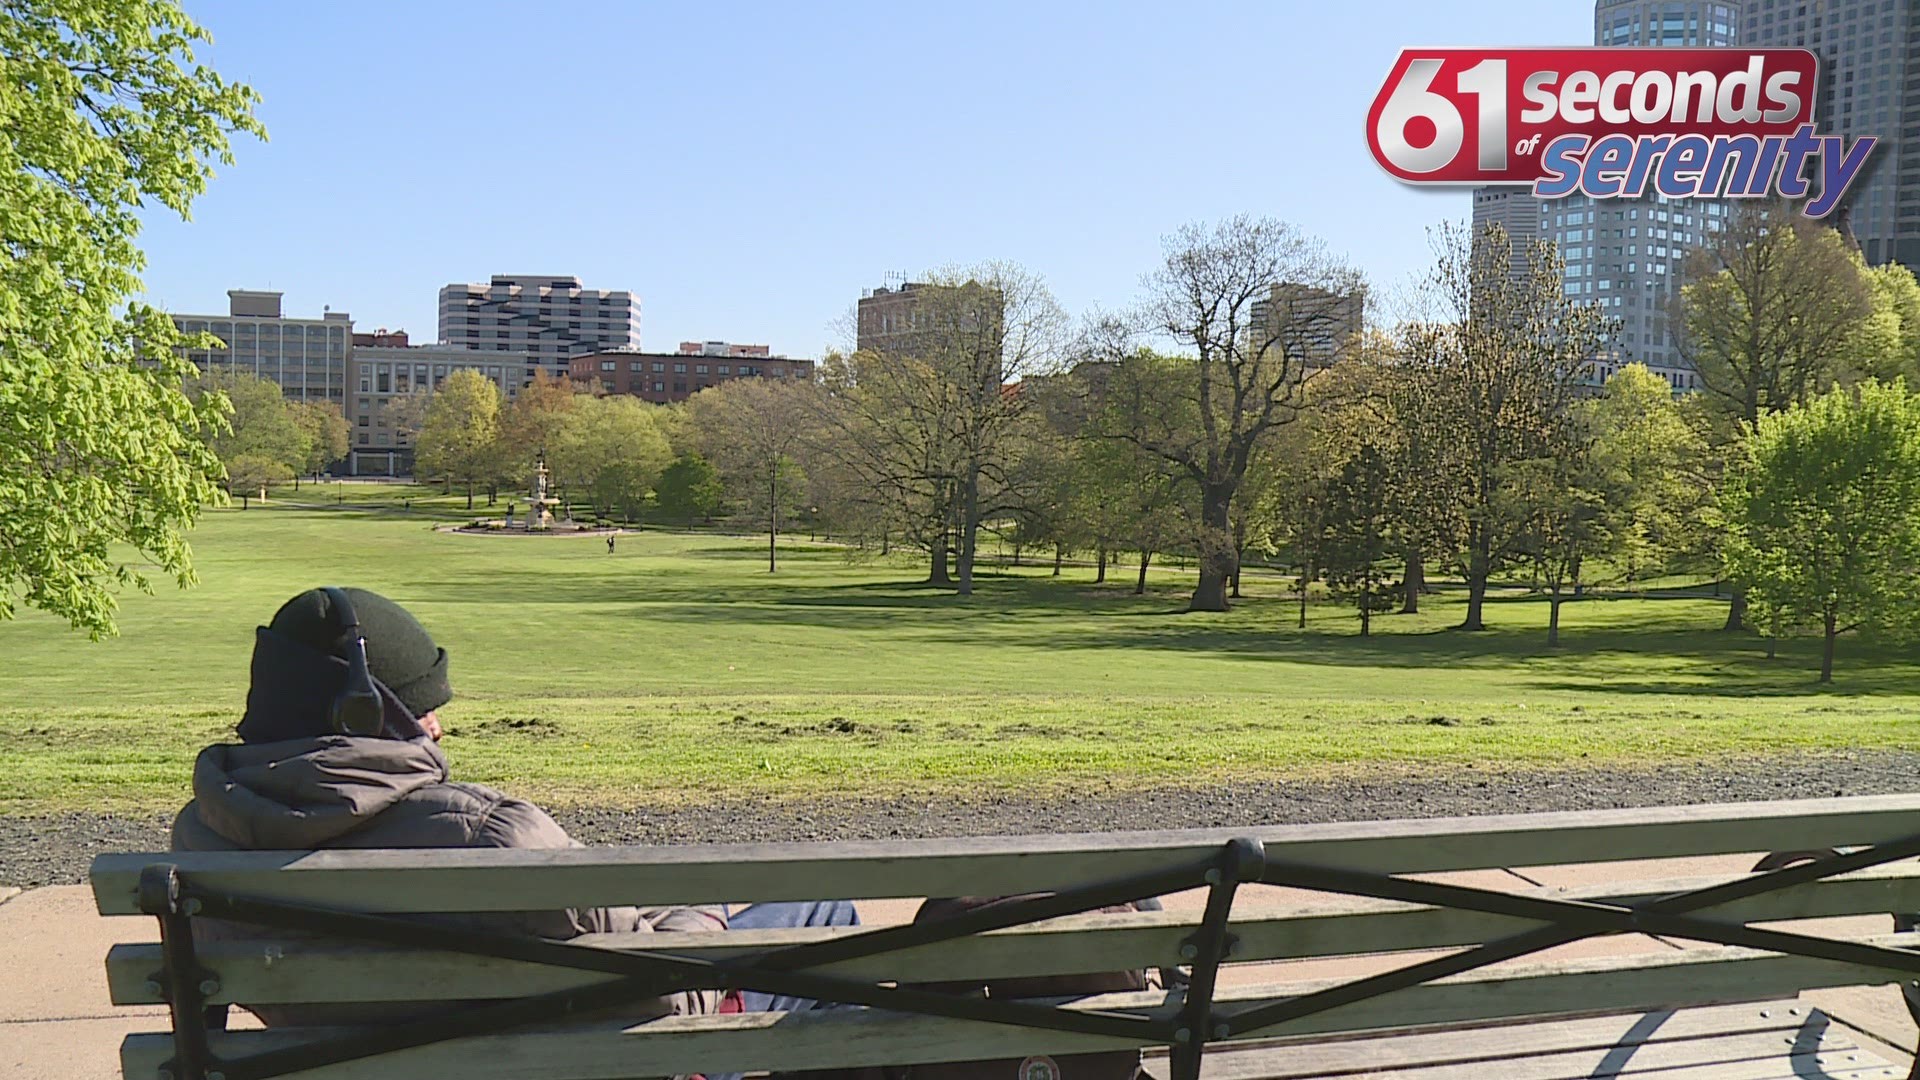 Time for 61 seconds of serenity, taking in the sun in Hartford this morning!